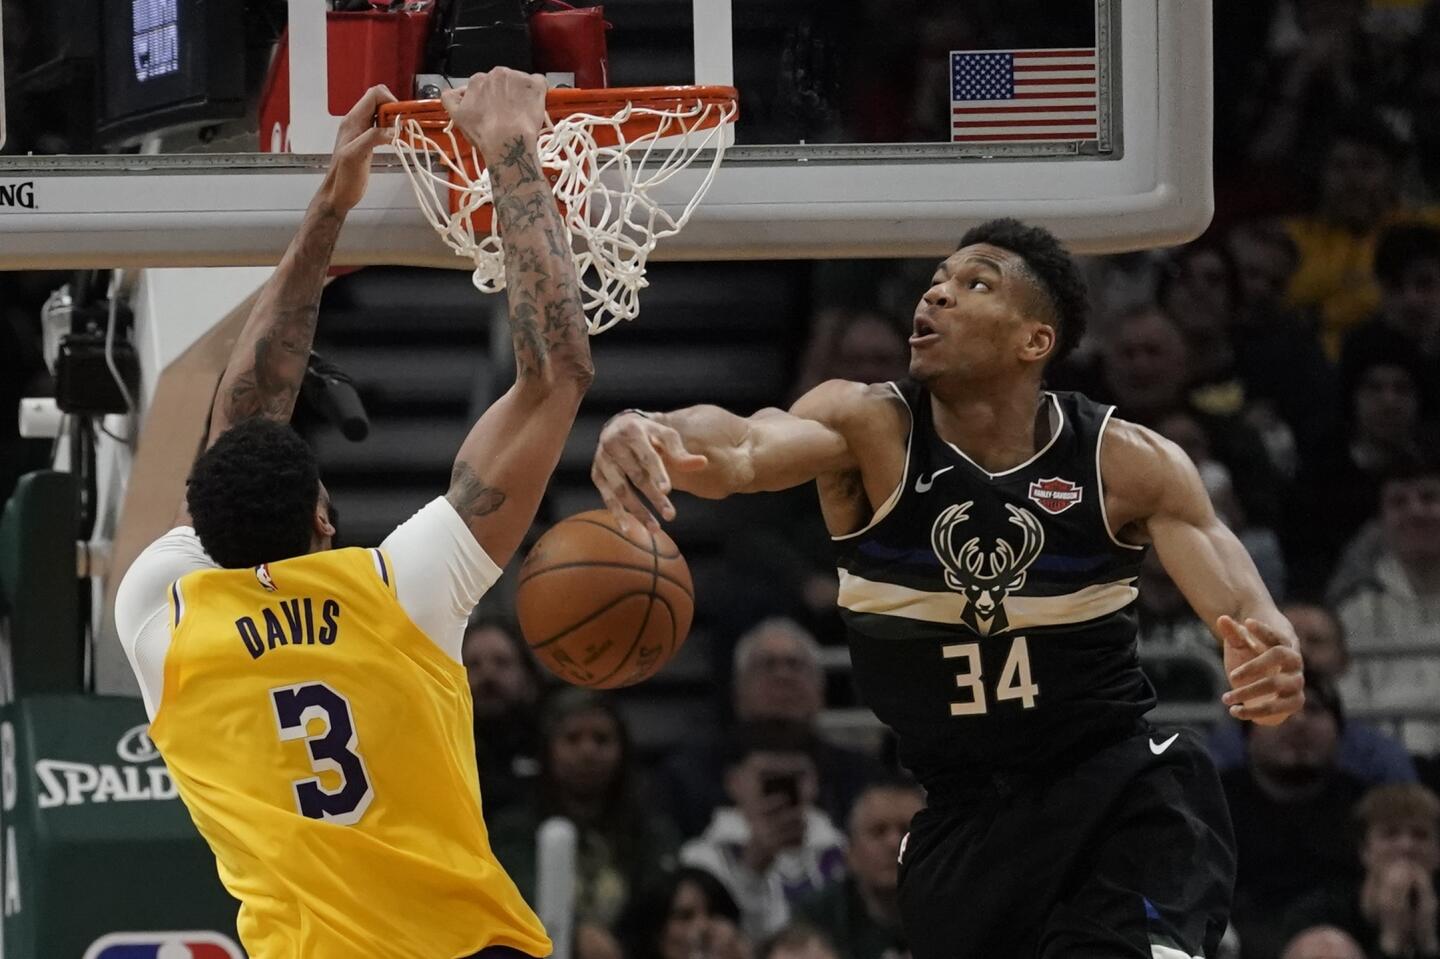 Anthony Davis dunks the ball in front of Giannis Antetokounmpo during the second half of a game Dec. 19.